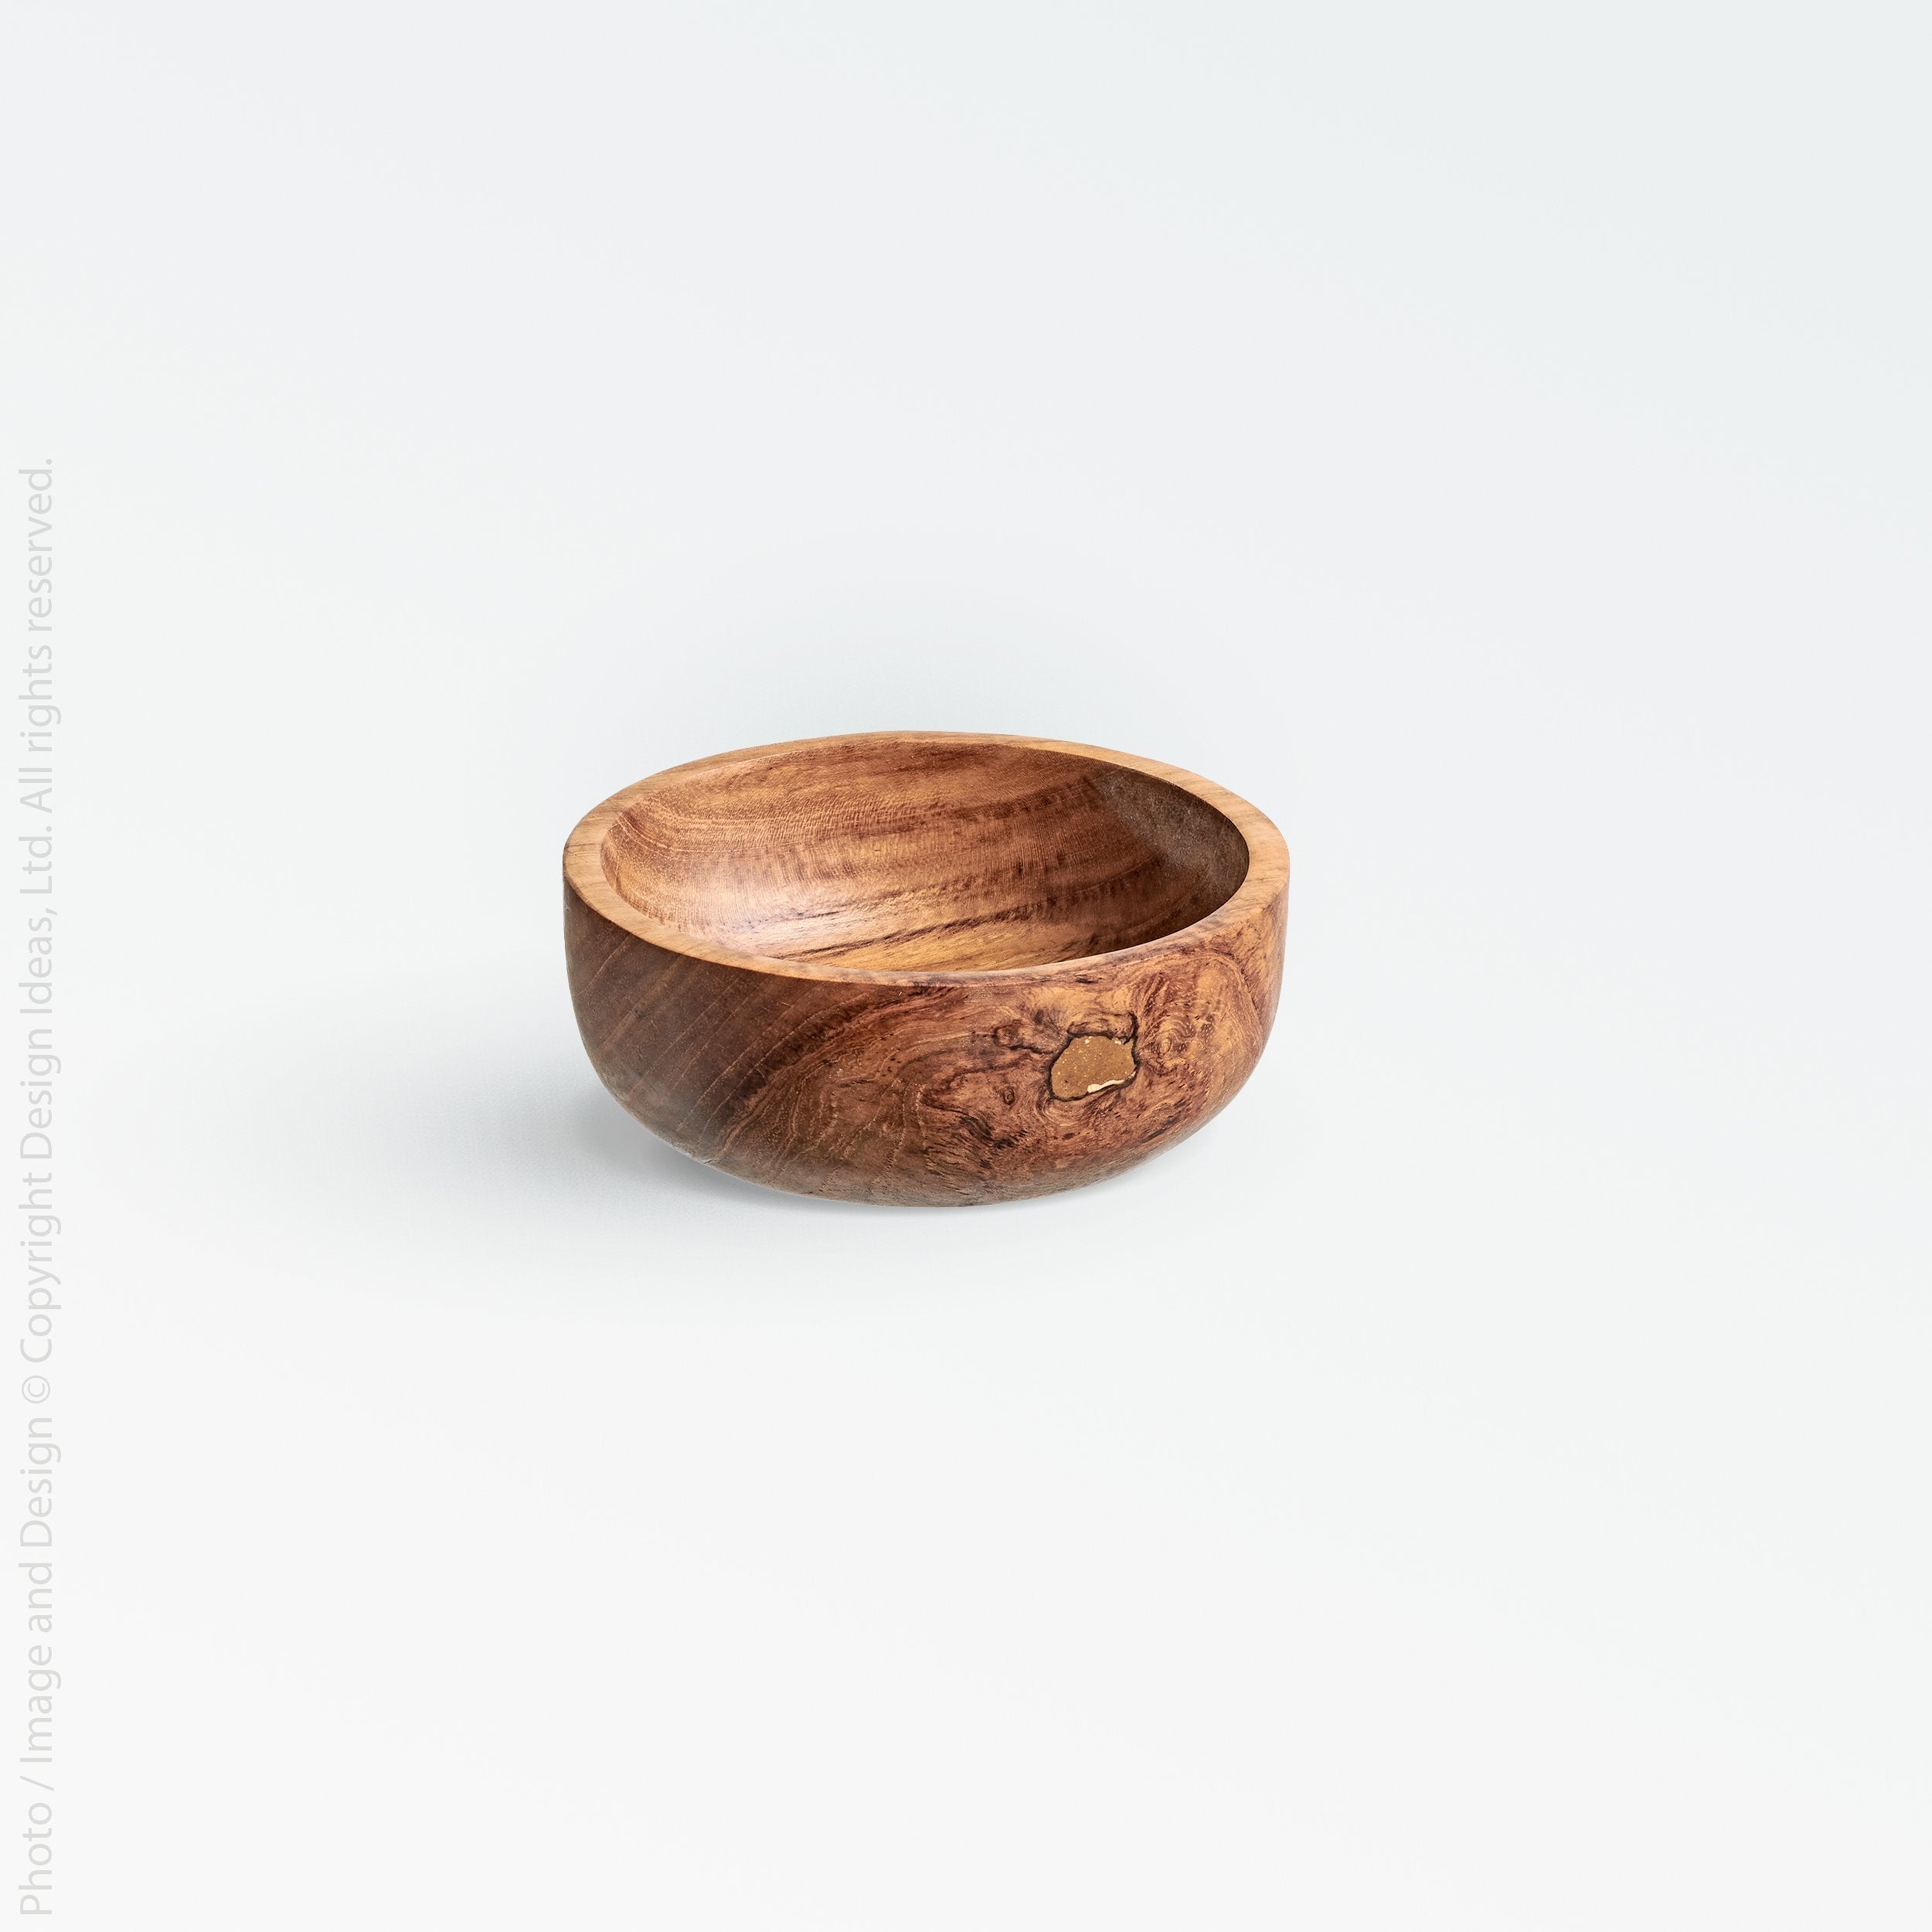 Chiku Teak Bowl (4.7 Inch Dia) - Black Color | Image 1 | From the Chiku Collection | Expertly created with natural teak for long lasting use | This bowl is sustainably sourced | Available in natural color | texxture home